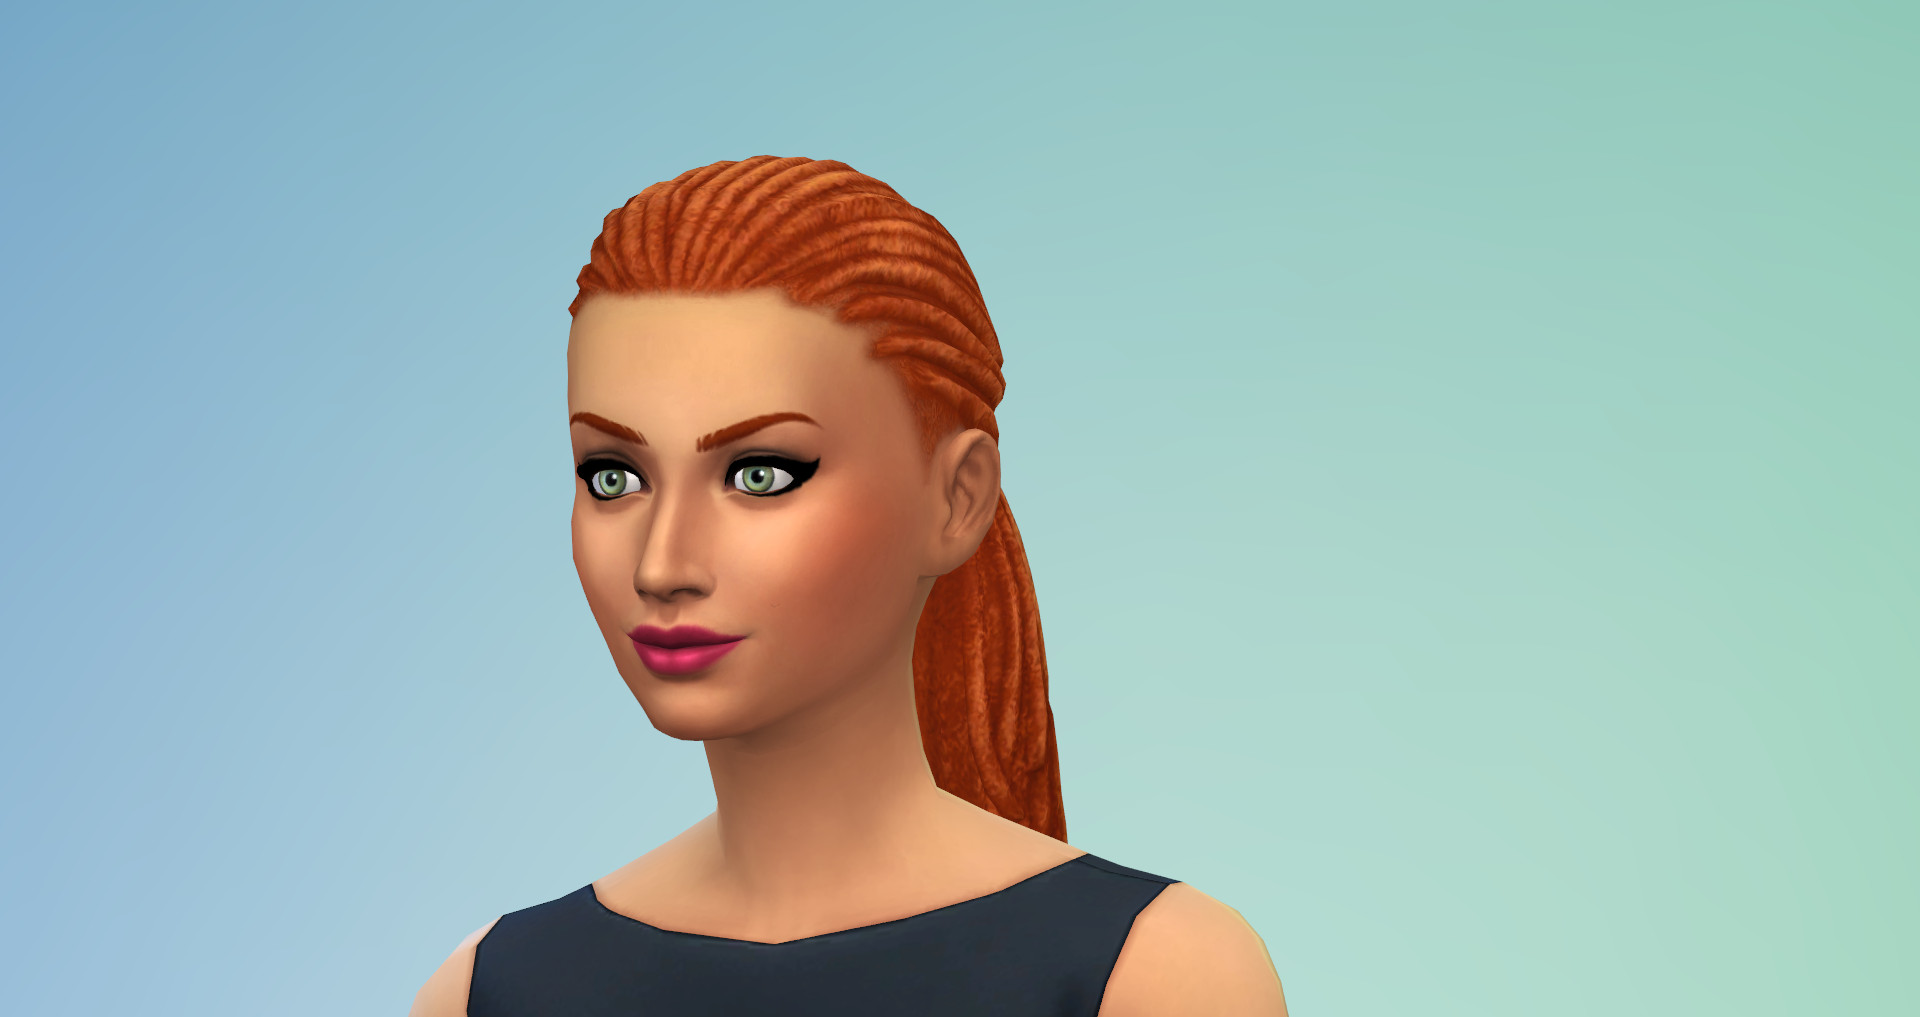 Sims 4 Hairstyles Female
 The Sims 4 Backyard Stuff Pack Guide